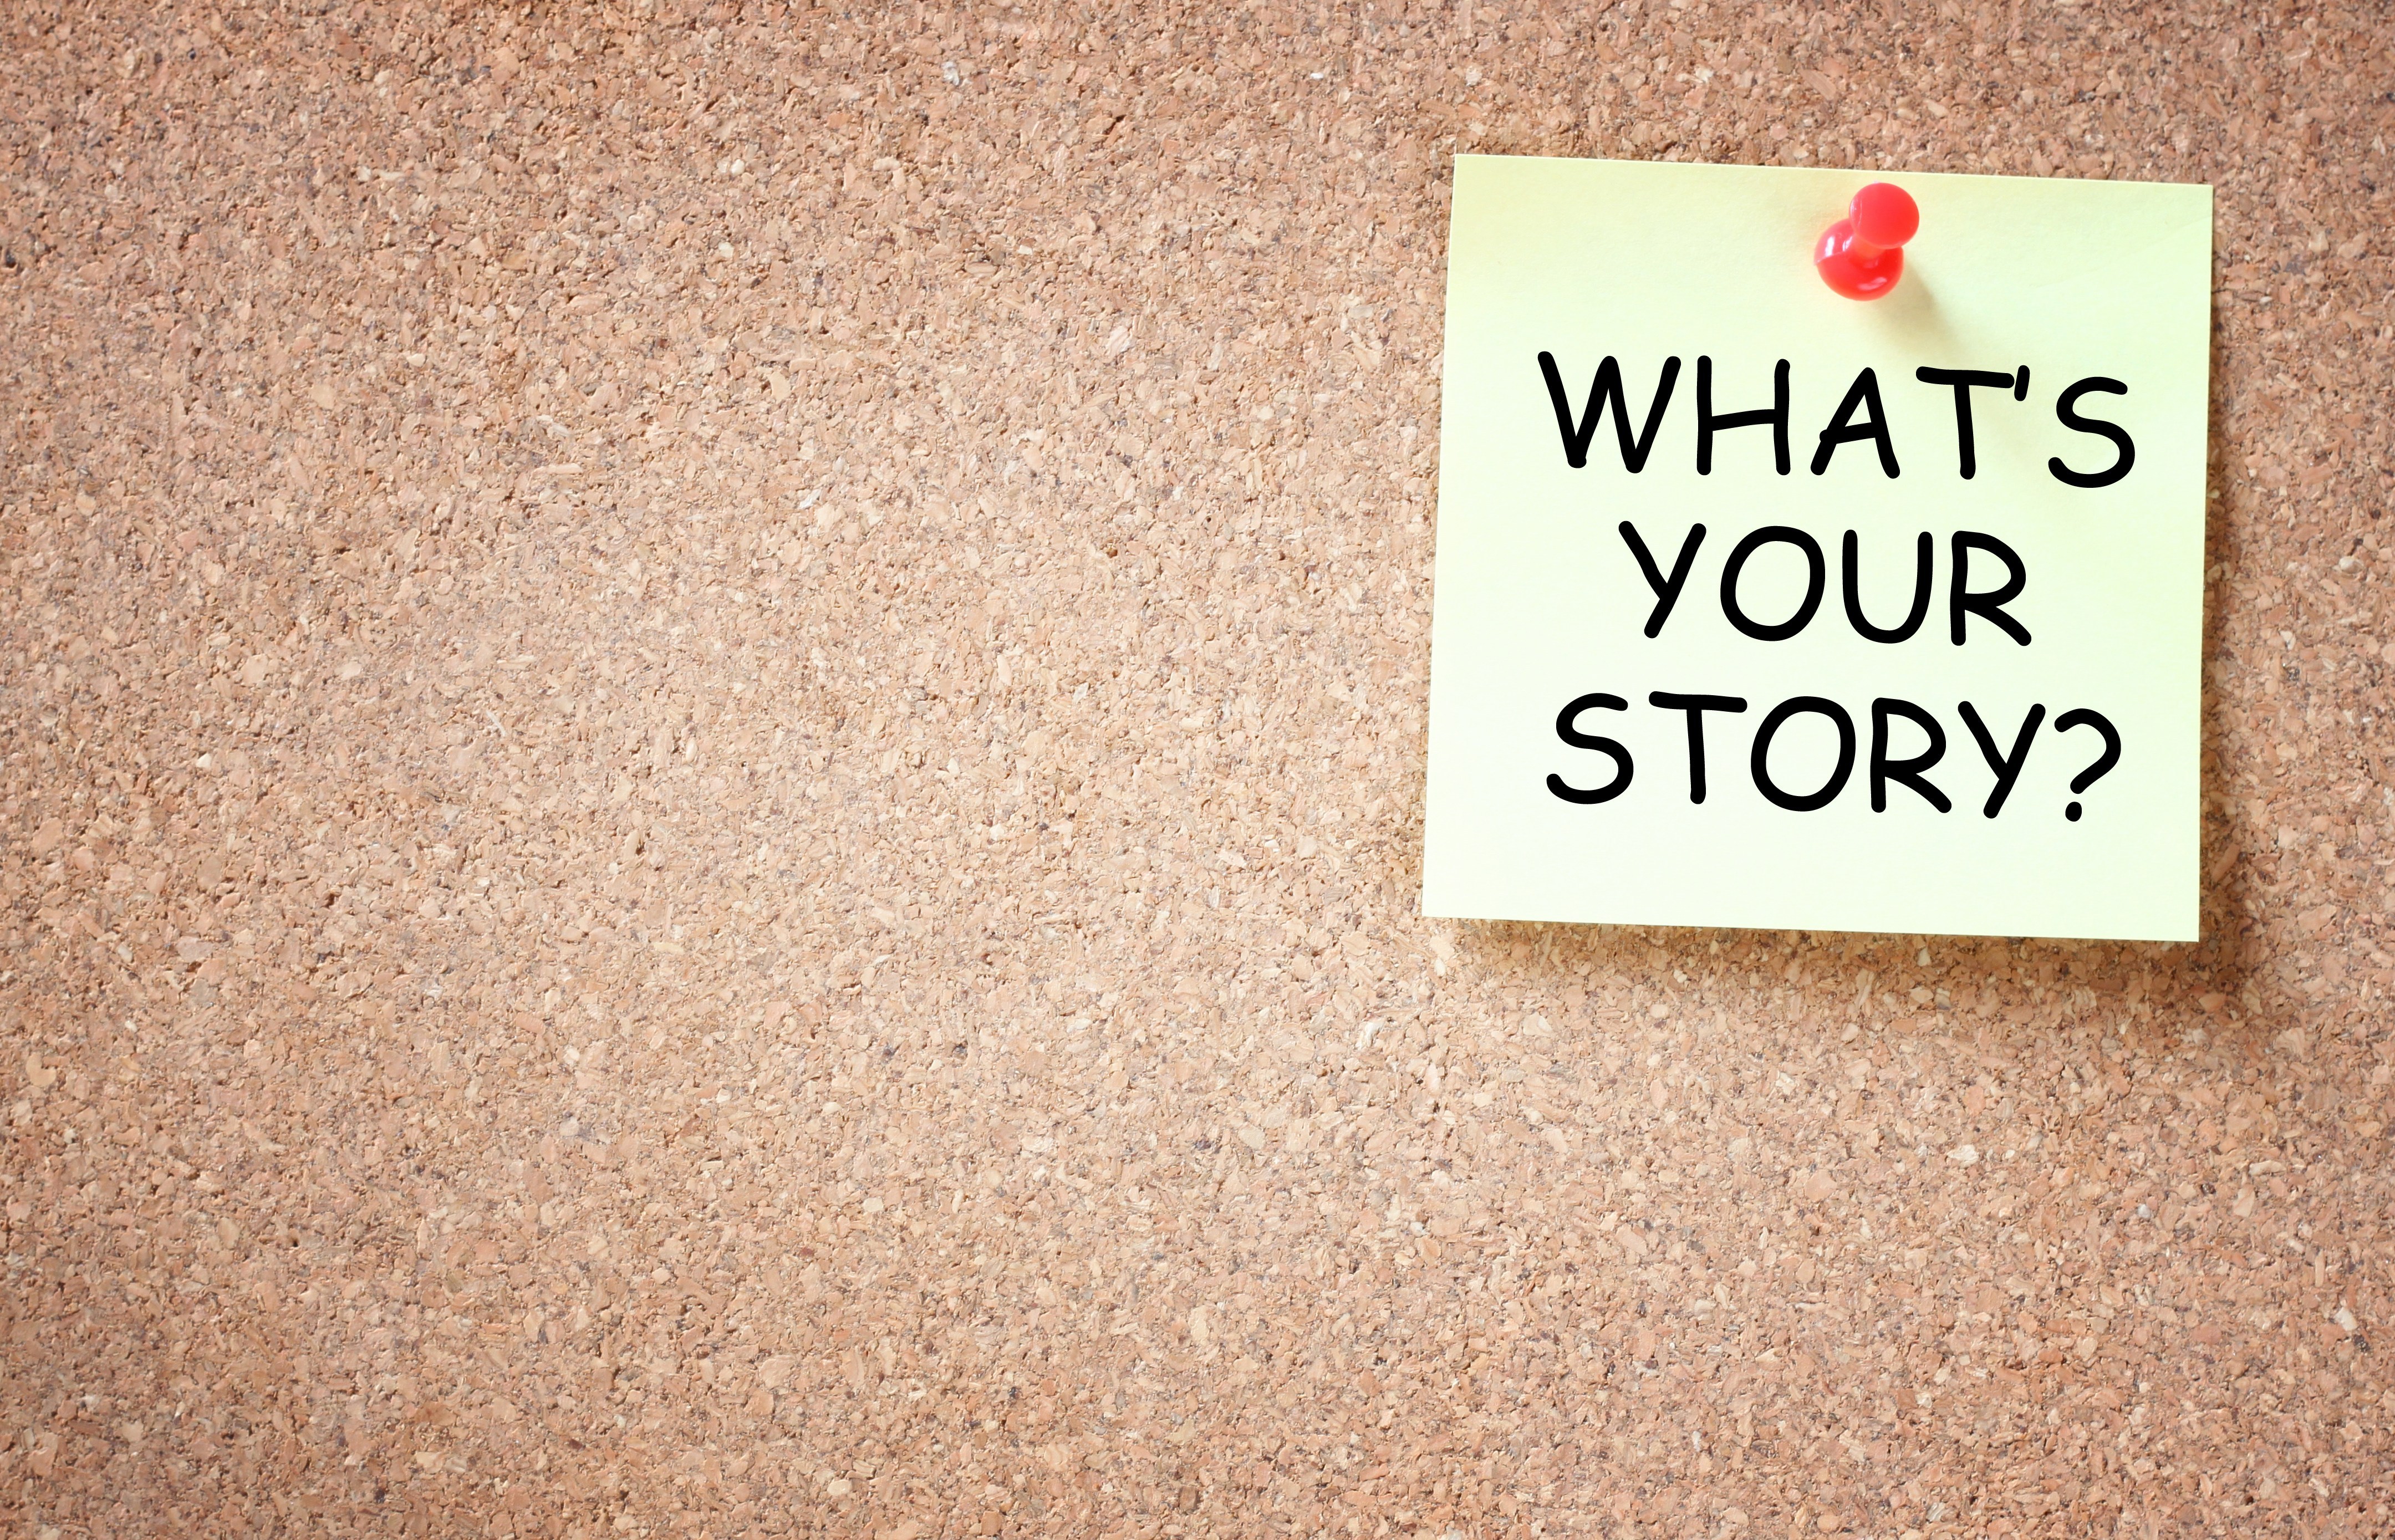 A cork board with a post-it tacked to it that says “What’s your story?”